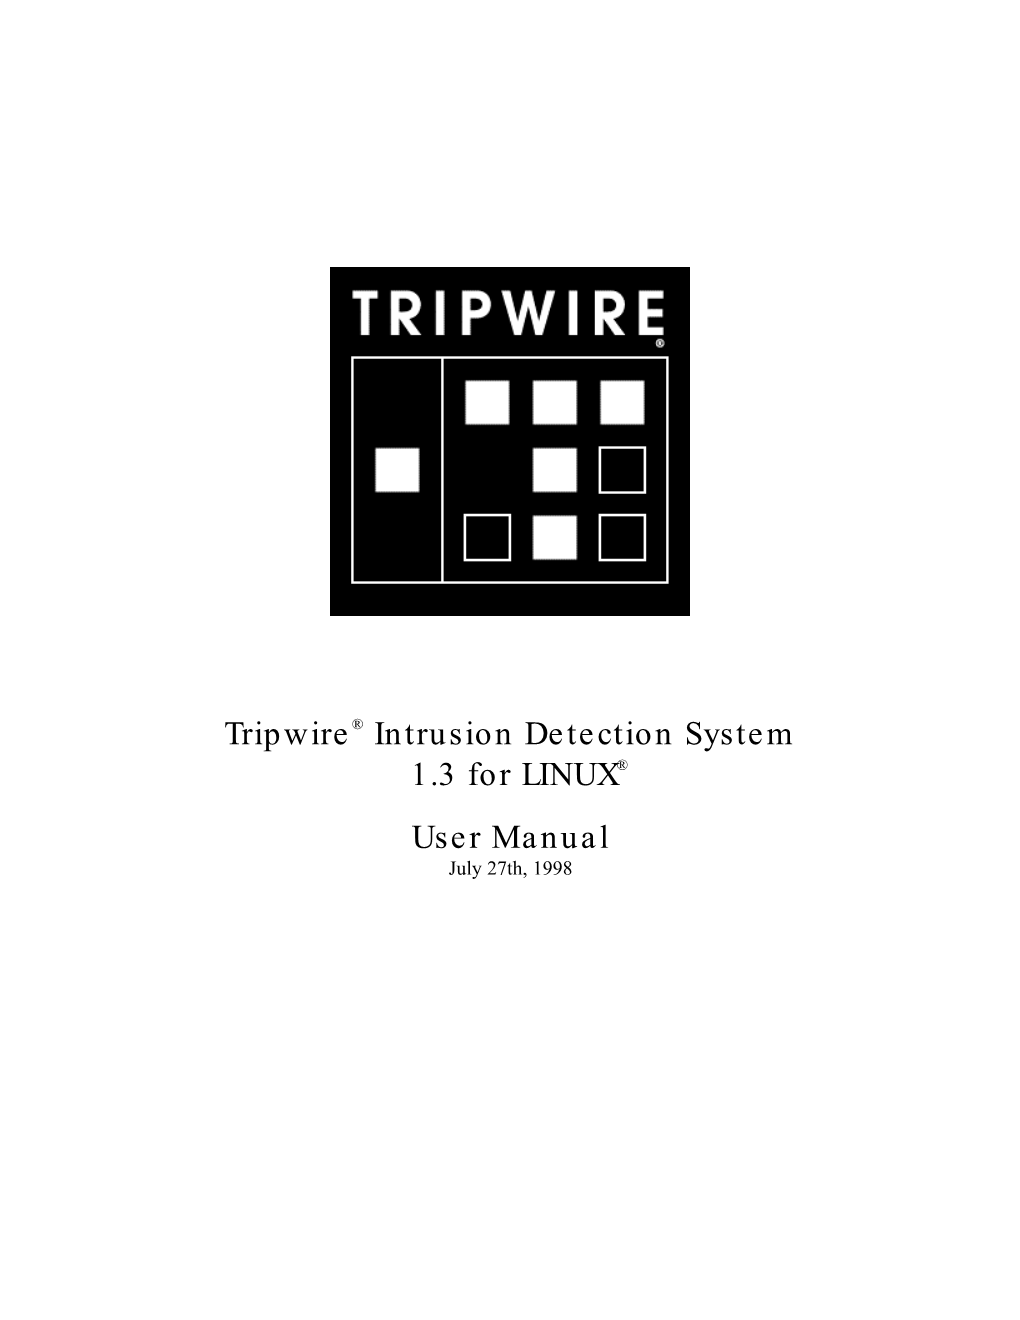 Tripwire® Intrusion Detection System 1.3 for LINUX® User Manual July 27Th, 1998 COPYRIGHT NOTICE